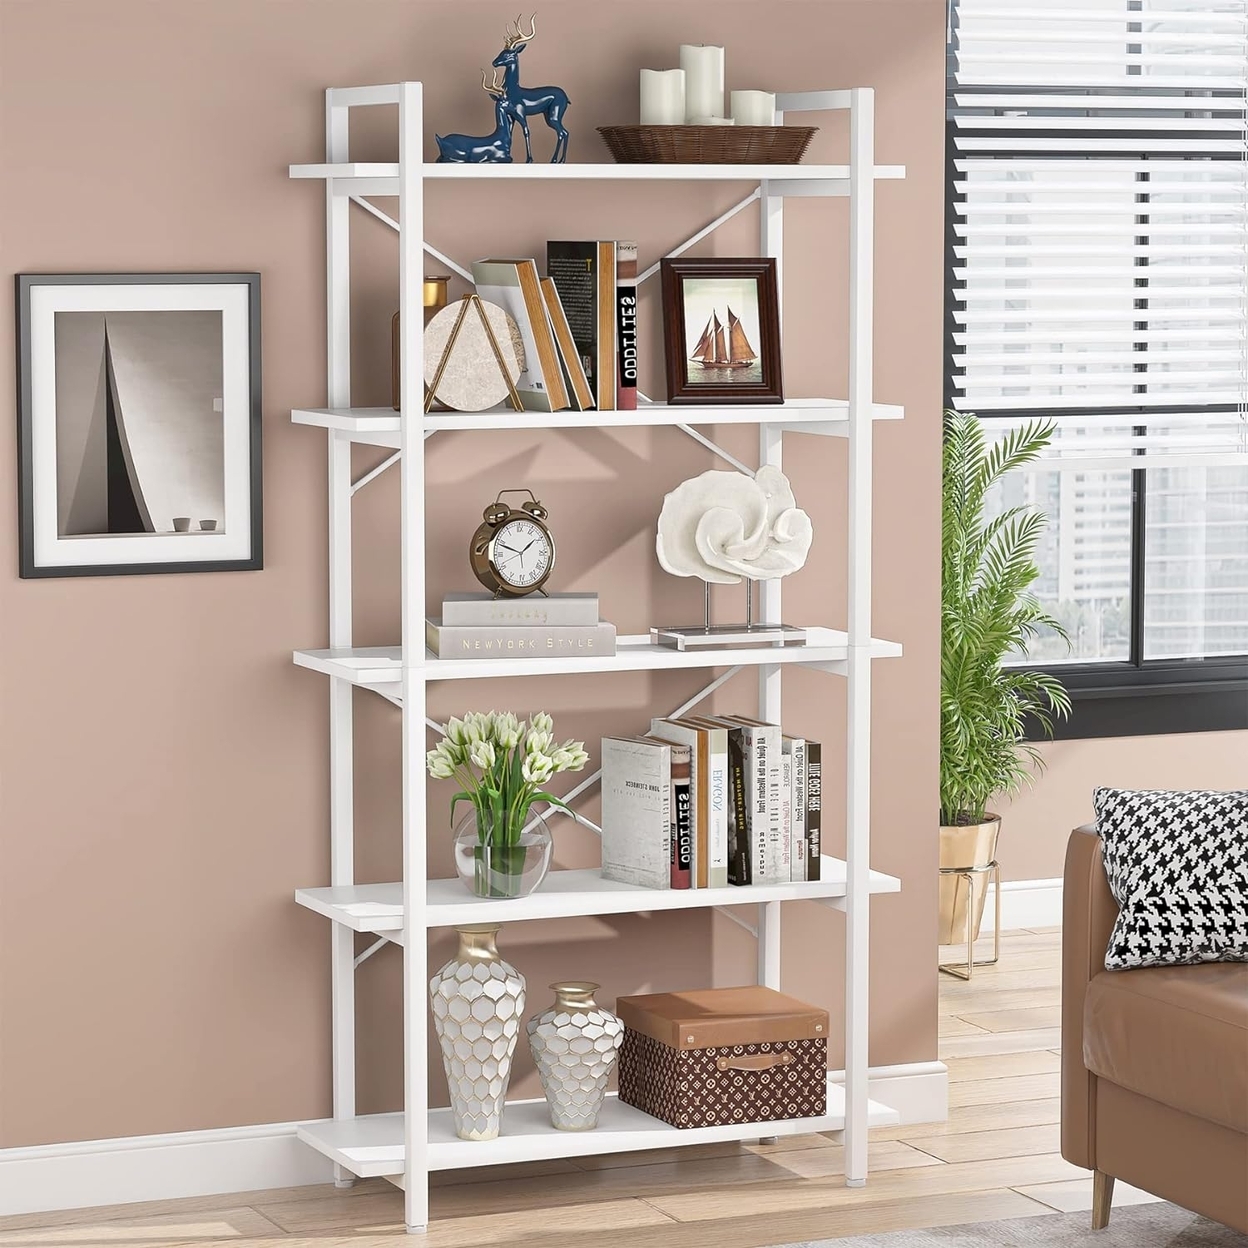 Tribesigns 5 Tier White Bookshelf, Modern Etagere Bookcase With Metal Frame, Tall Book Shelf Unit - 1pc